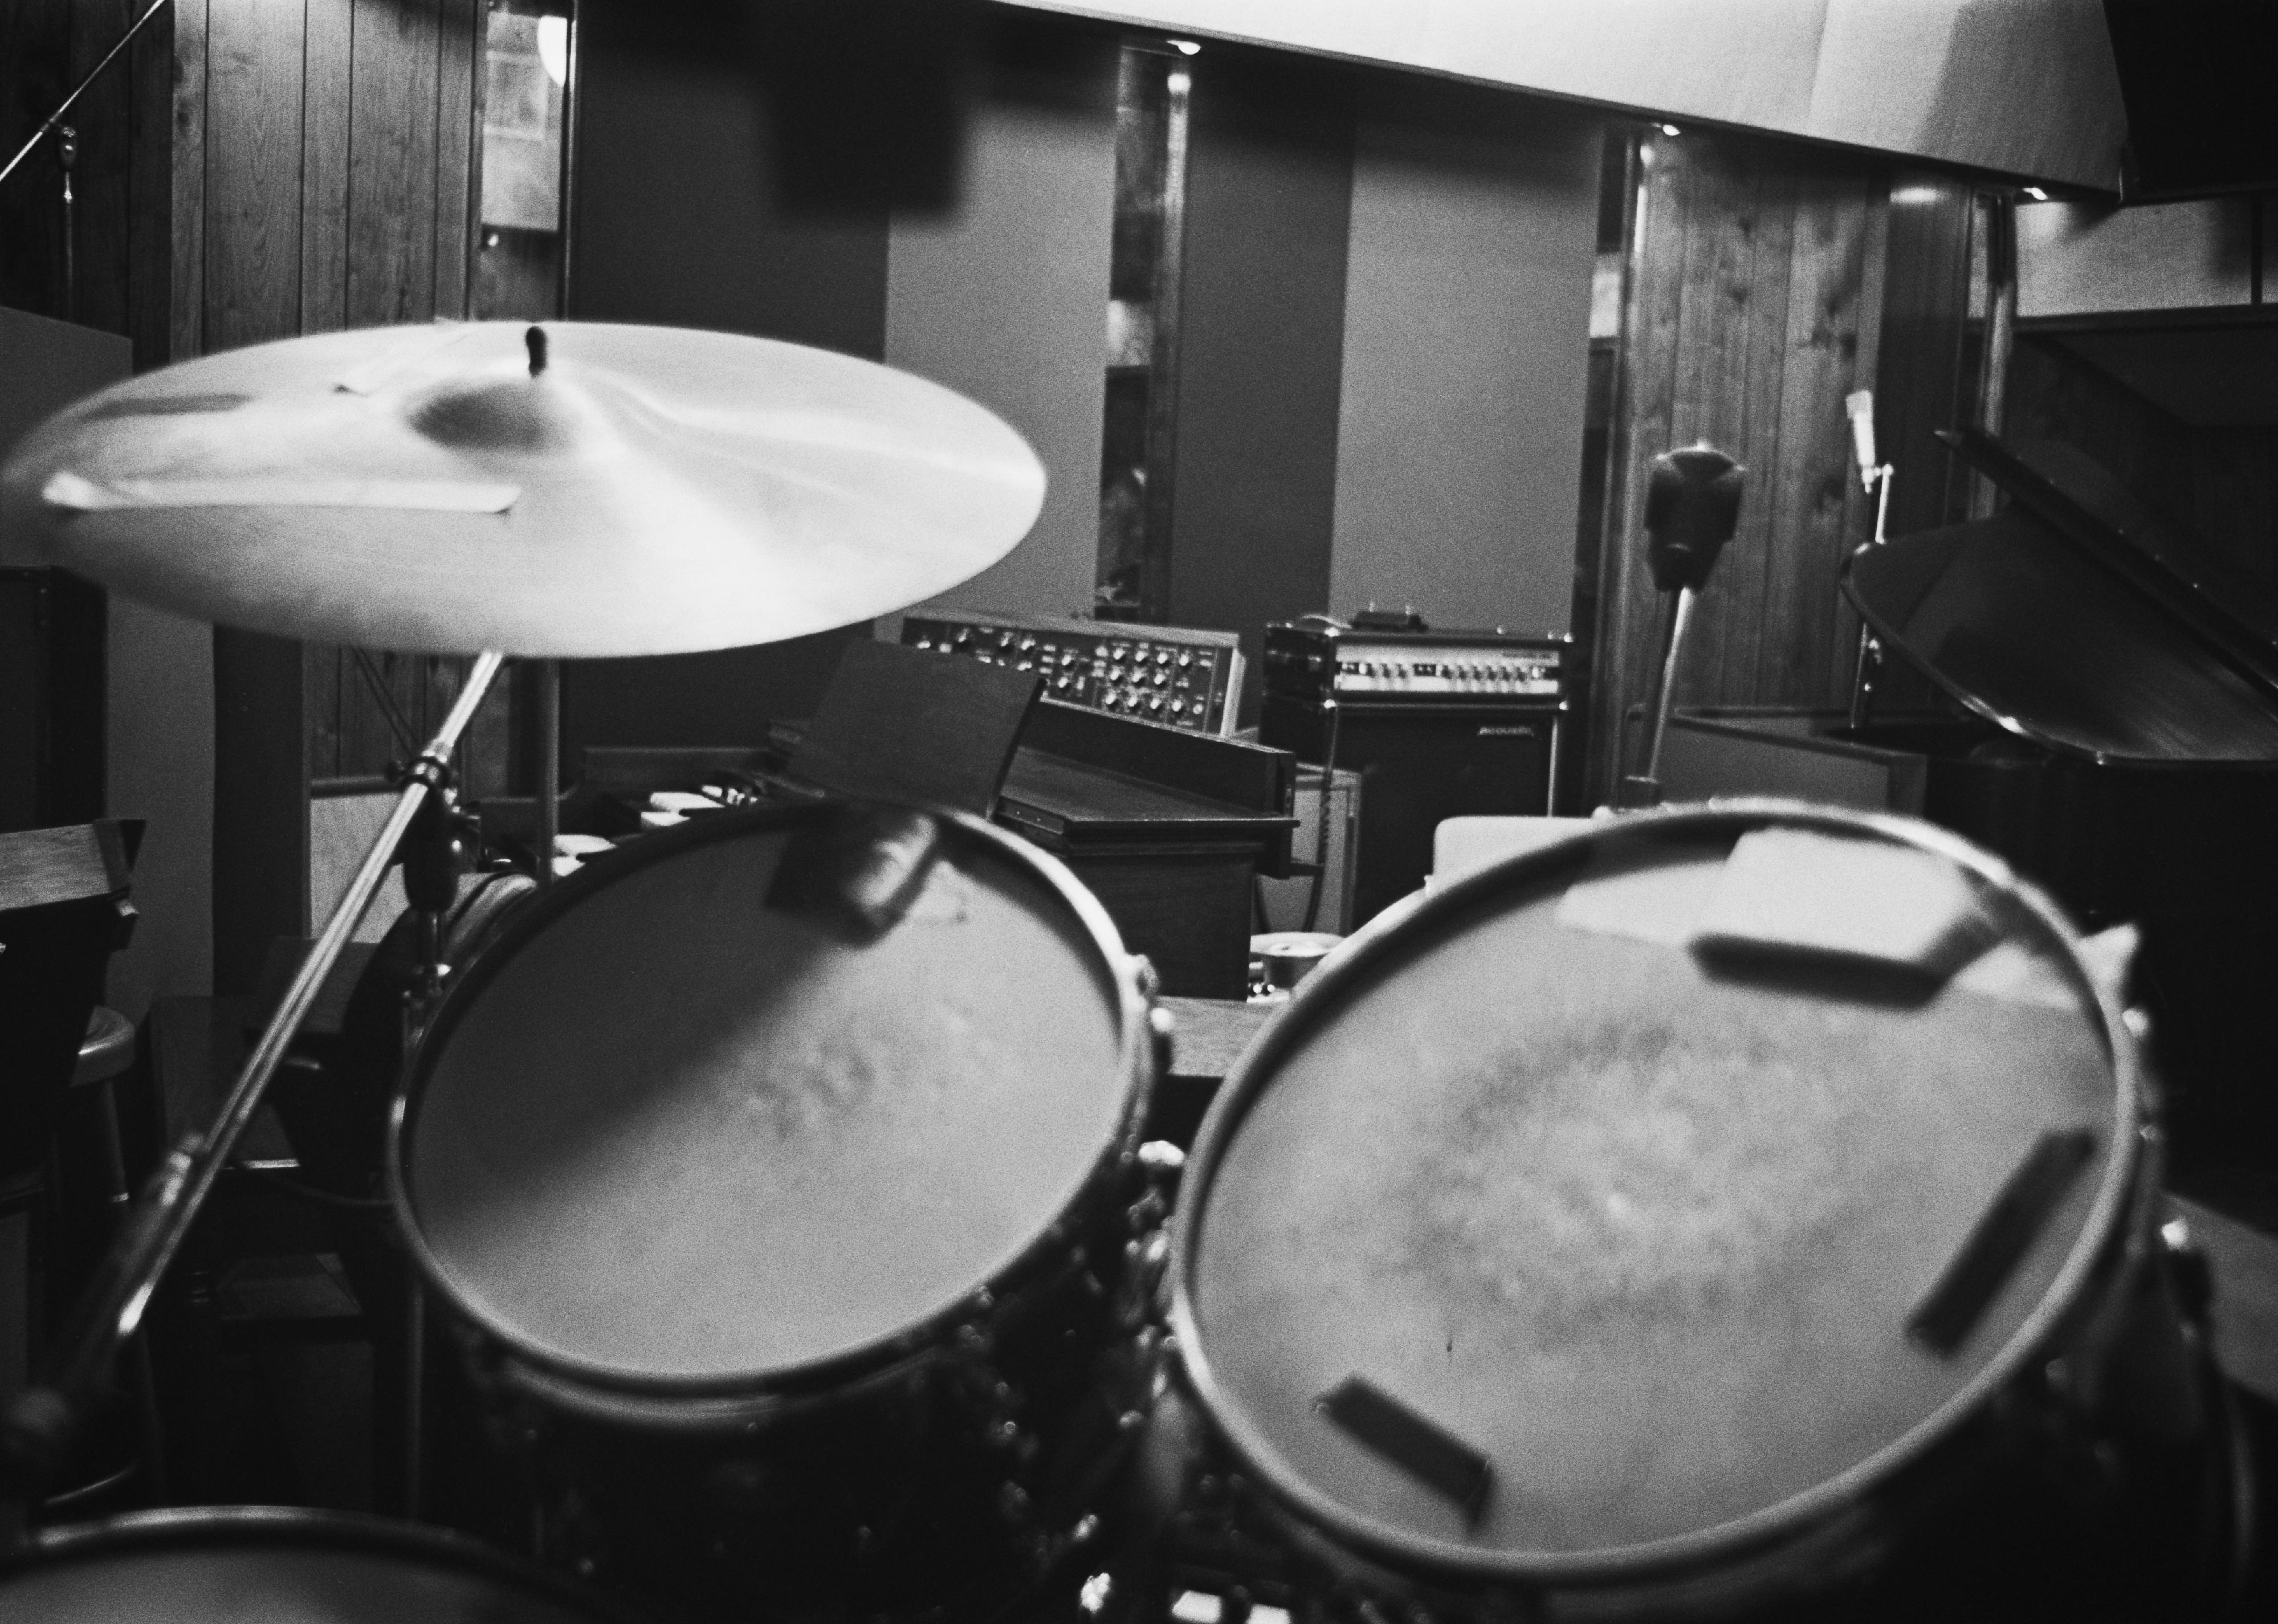 A drum kit at the Bolic Sound recording studio in Los Angeles in 1972.